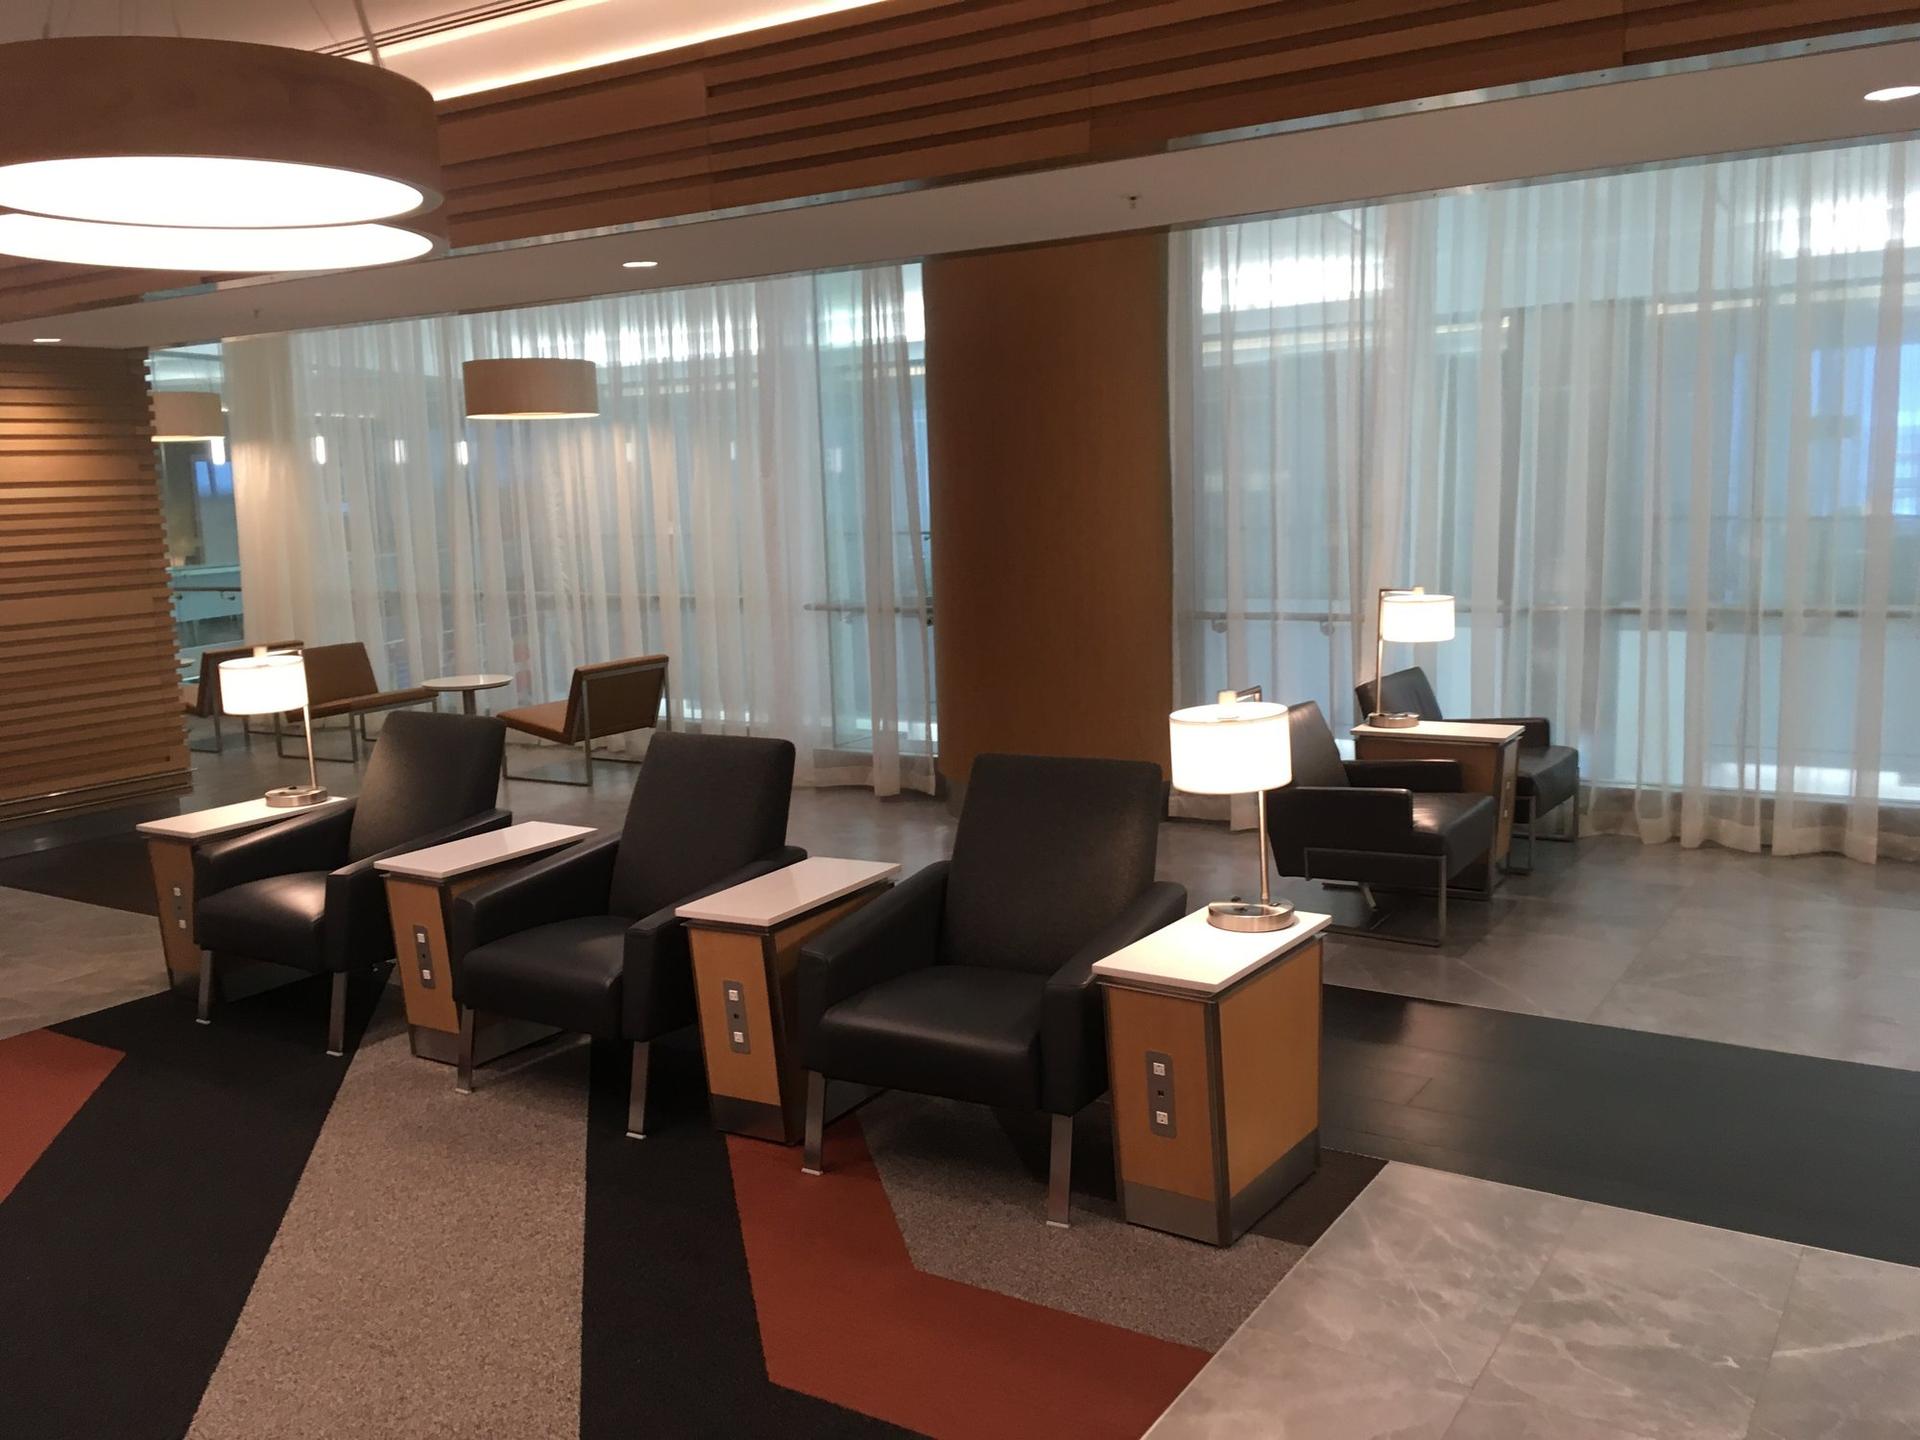 American Airlines Flagship Lounge image 42 of 65